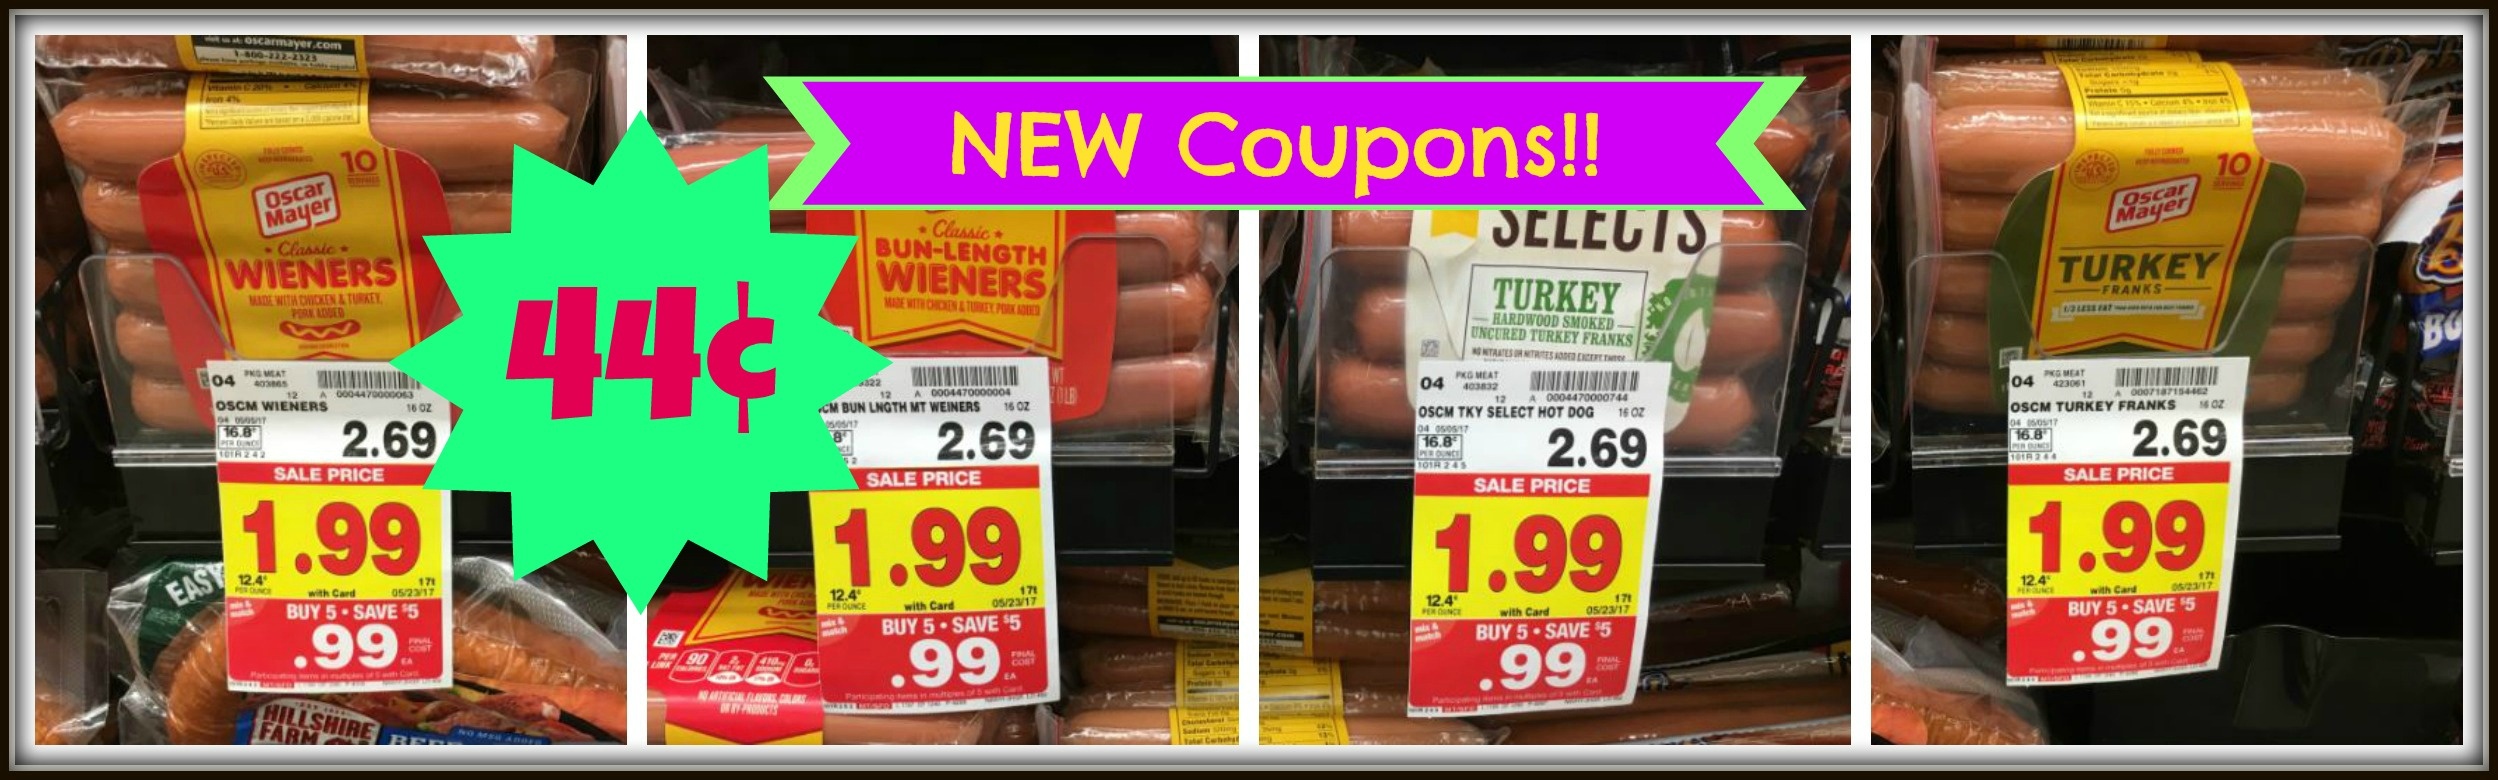 New Oscar Mayer Coupons| Hot Dogs Only $0.44 At Kroger!! | Kroger Krazy - Free Printable Oscar Mayer Coupons